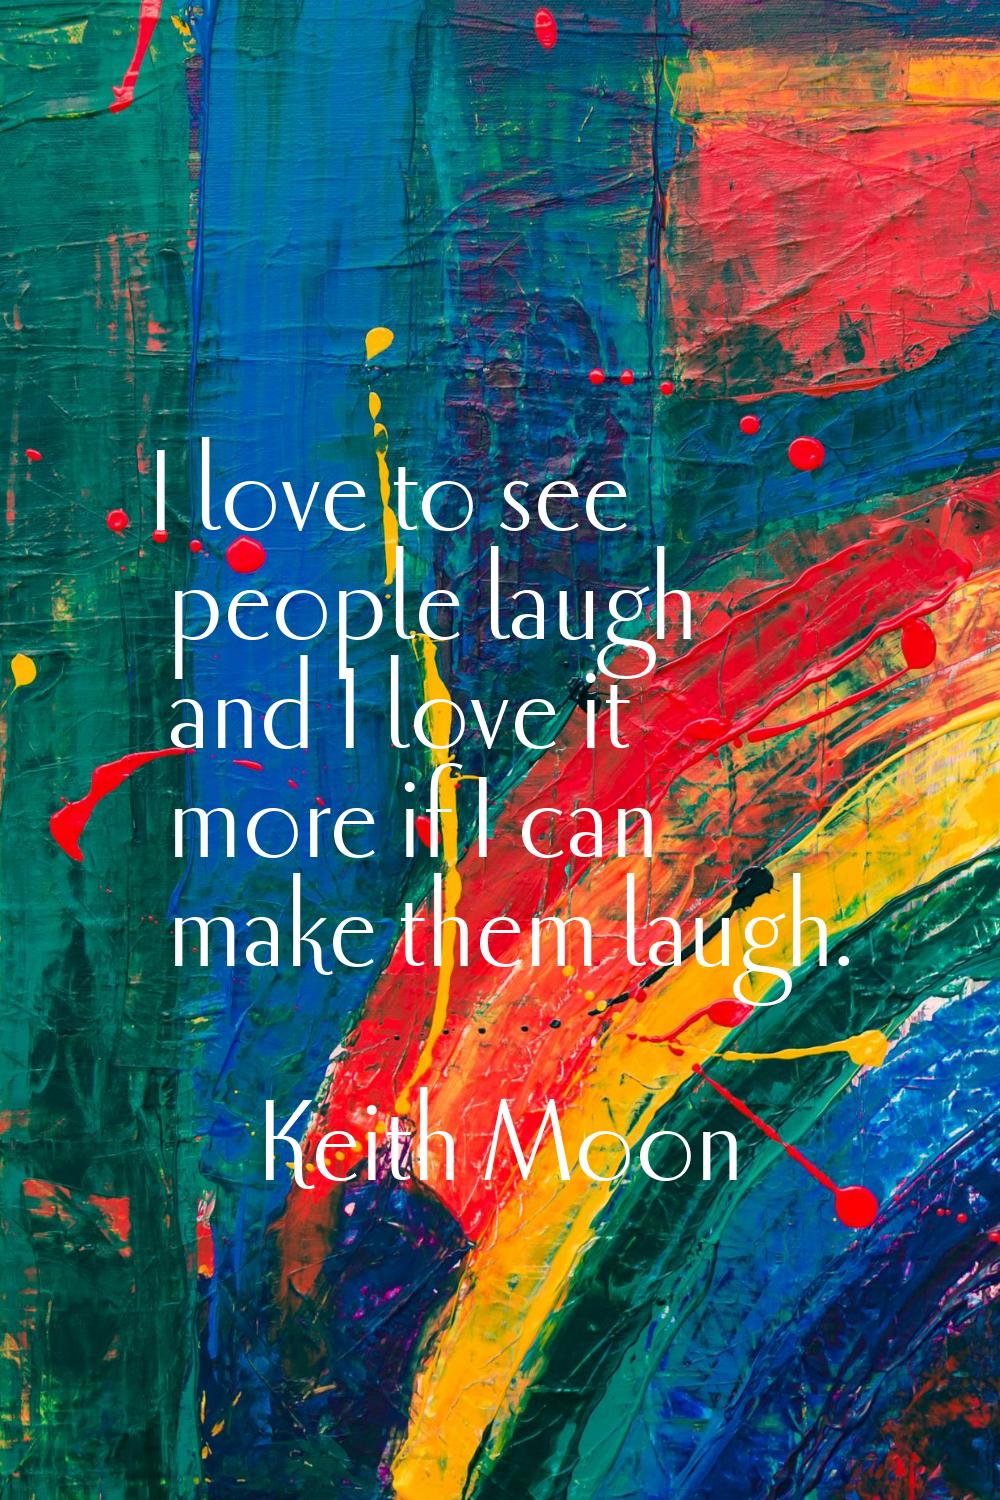 I love to see people laugh and I love it more if I can make them laugh.